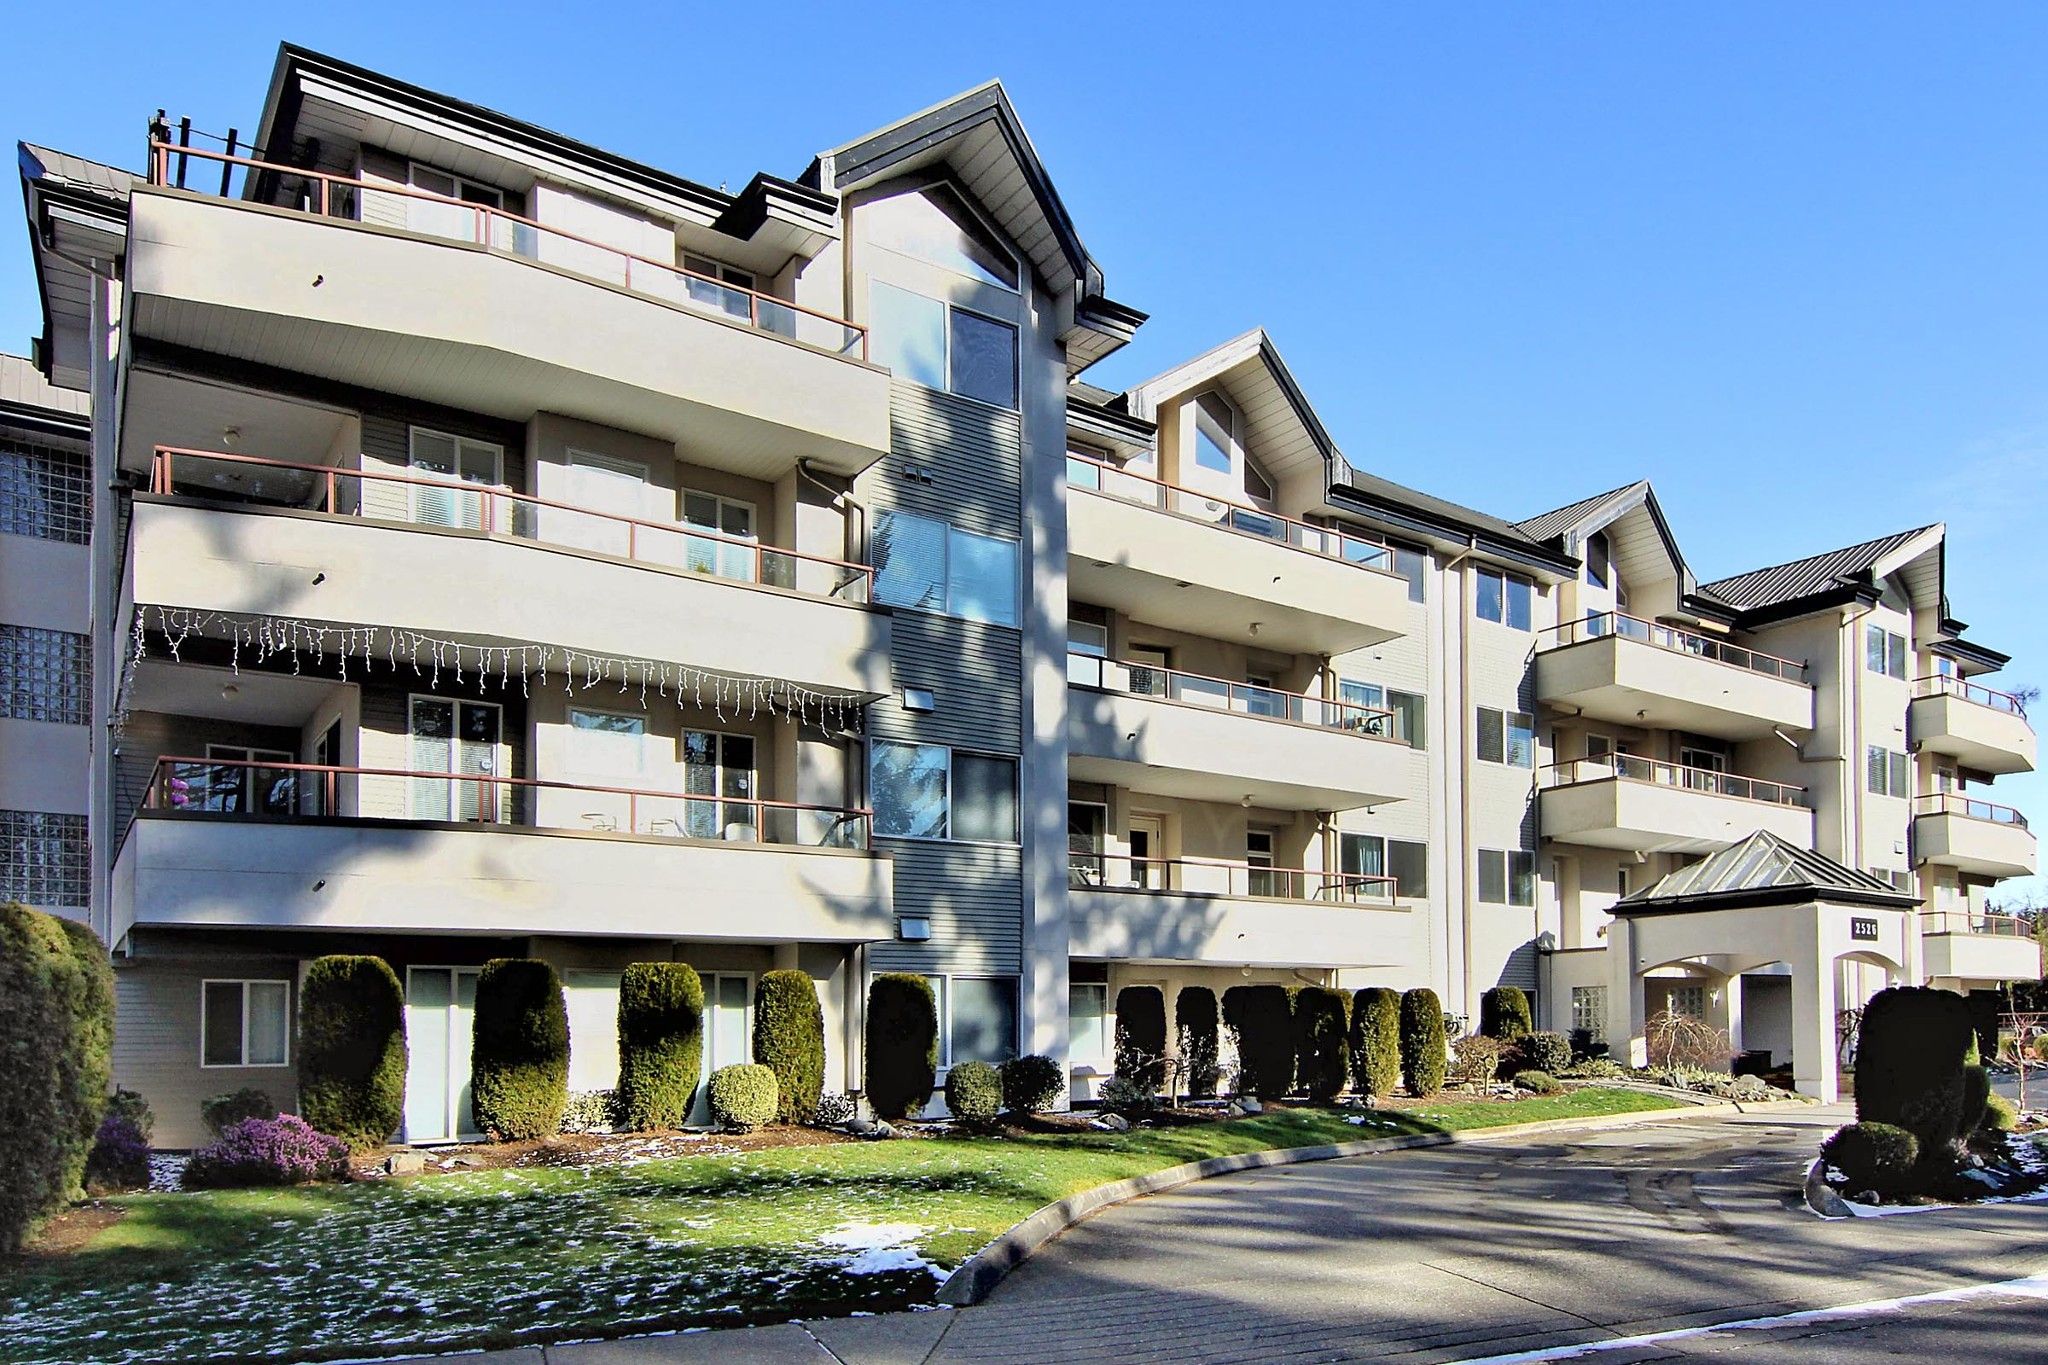 Main Photo: 304 2526 LAKEVIEW Crescent in Abbotsford: Central Abbotsford Condo for sale : MLS®# R2337653